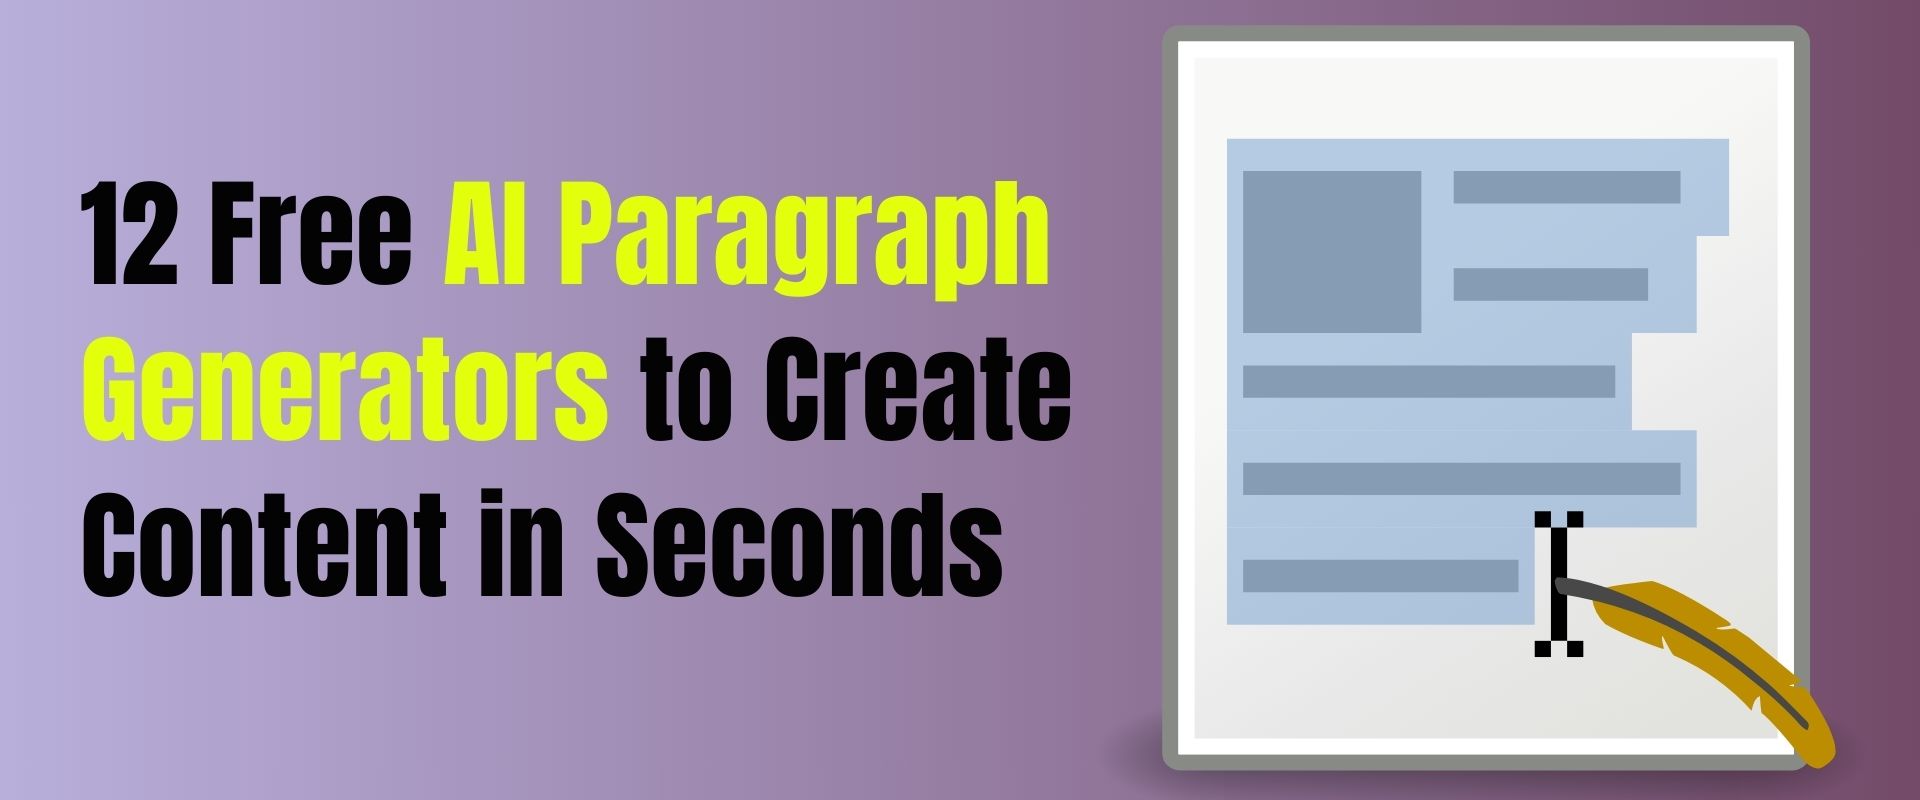 12 Free AI Paragraph Generators to Create Content in Seconds